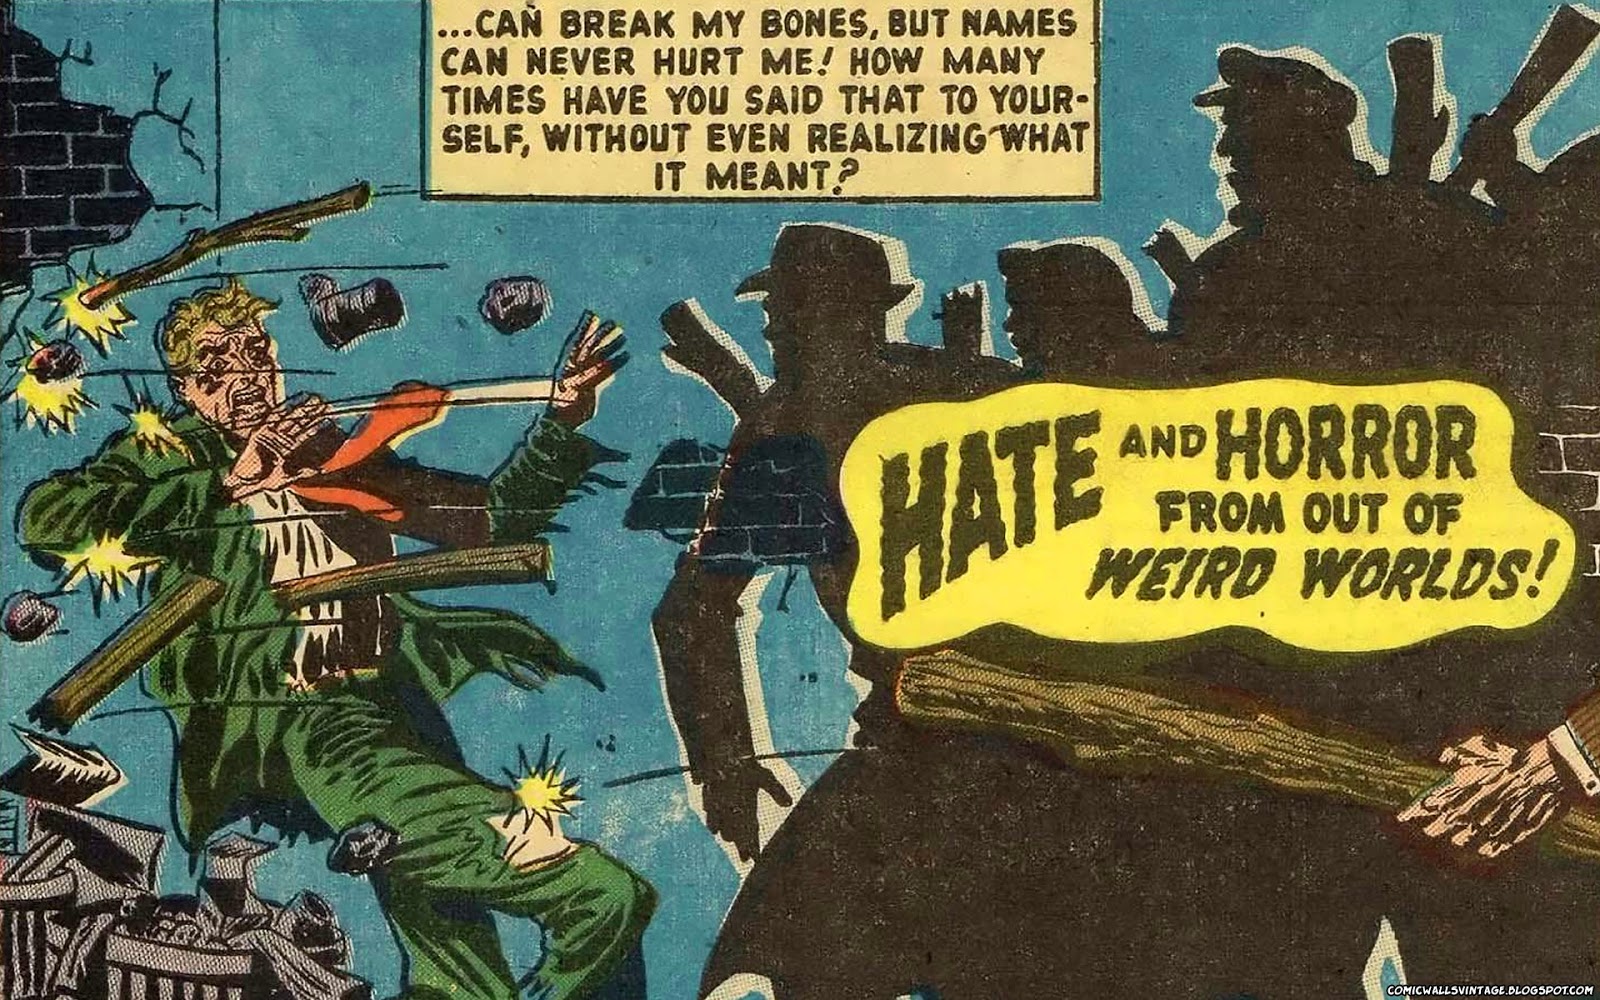 Comic Wallpaper Vintage: Hate and Horror from out of WEIRD WORLDS! (Vintage Comic Wallpaper)